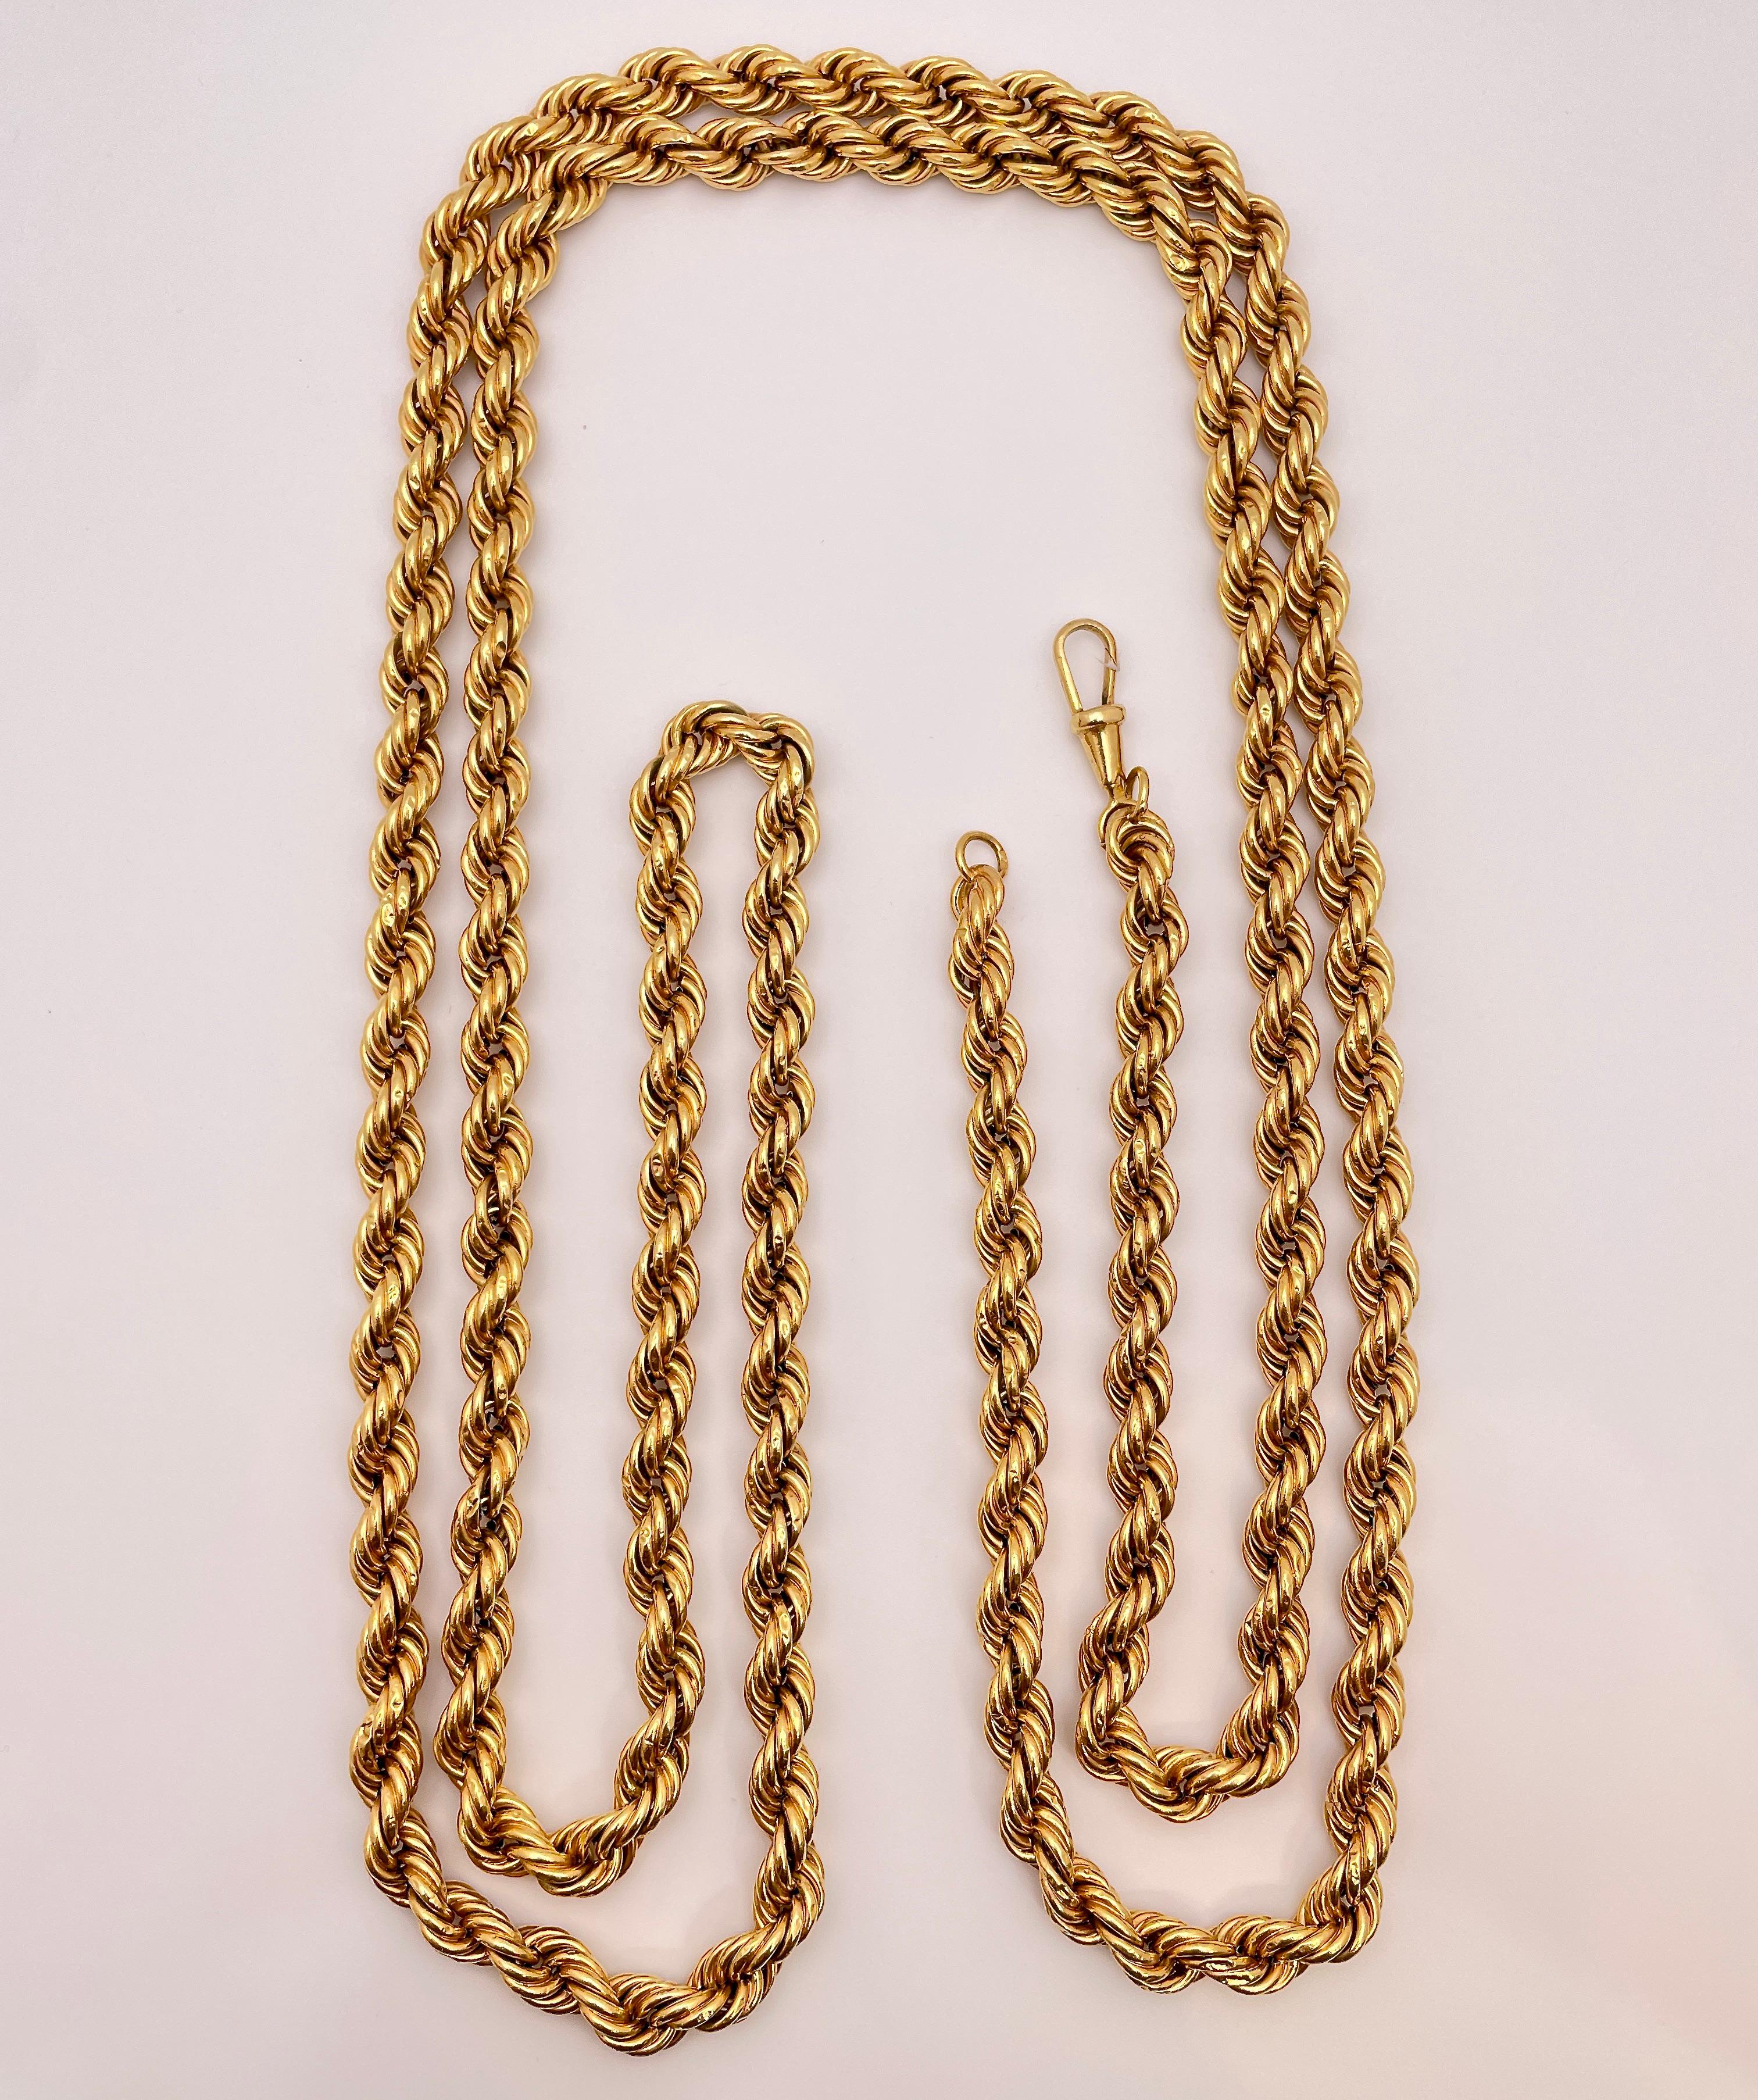 An original antique 18K yellow thick gold rope chain necklace, circa 1950's. This magnificent chain measures an impressive 58.75 inches long, 7.50 mm wide, features a beautiful flexible woven design, and has a gross weight of 61 grams. Additionally,